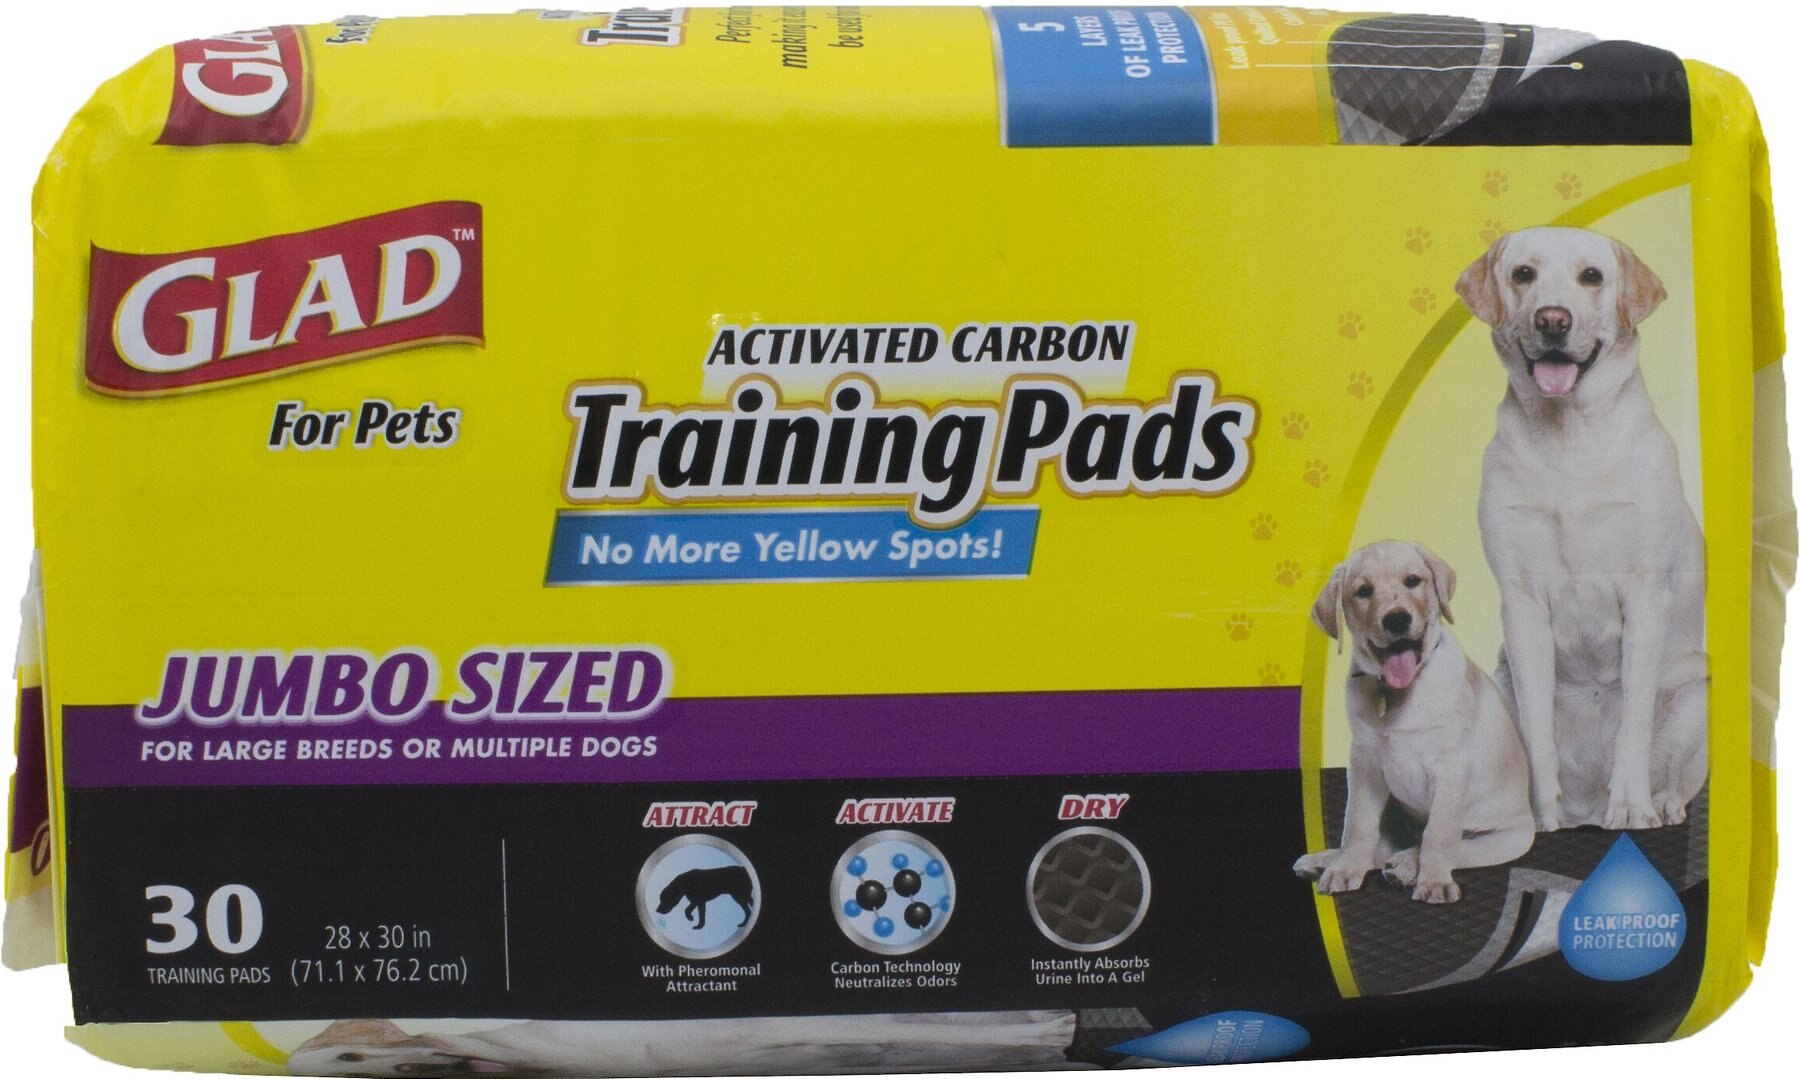 Glad for Pets Activated Carbon Puppy Training Pads